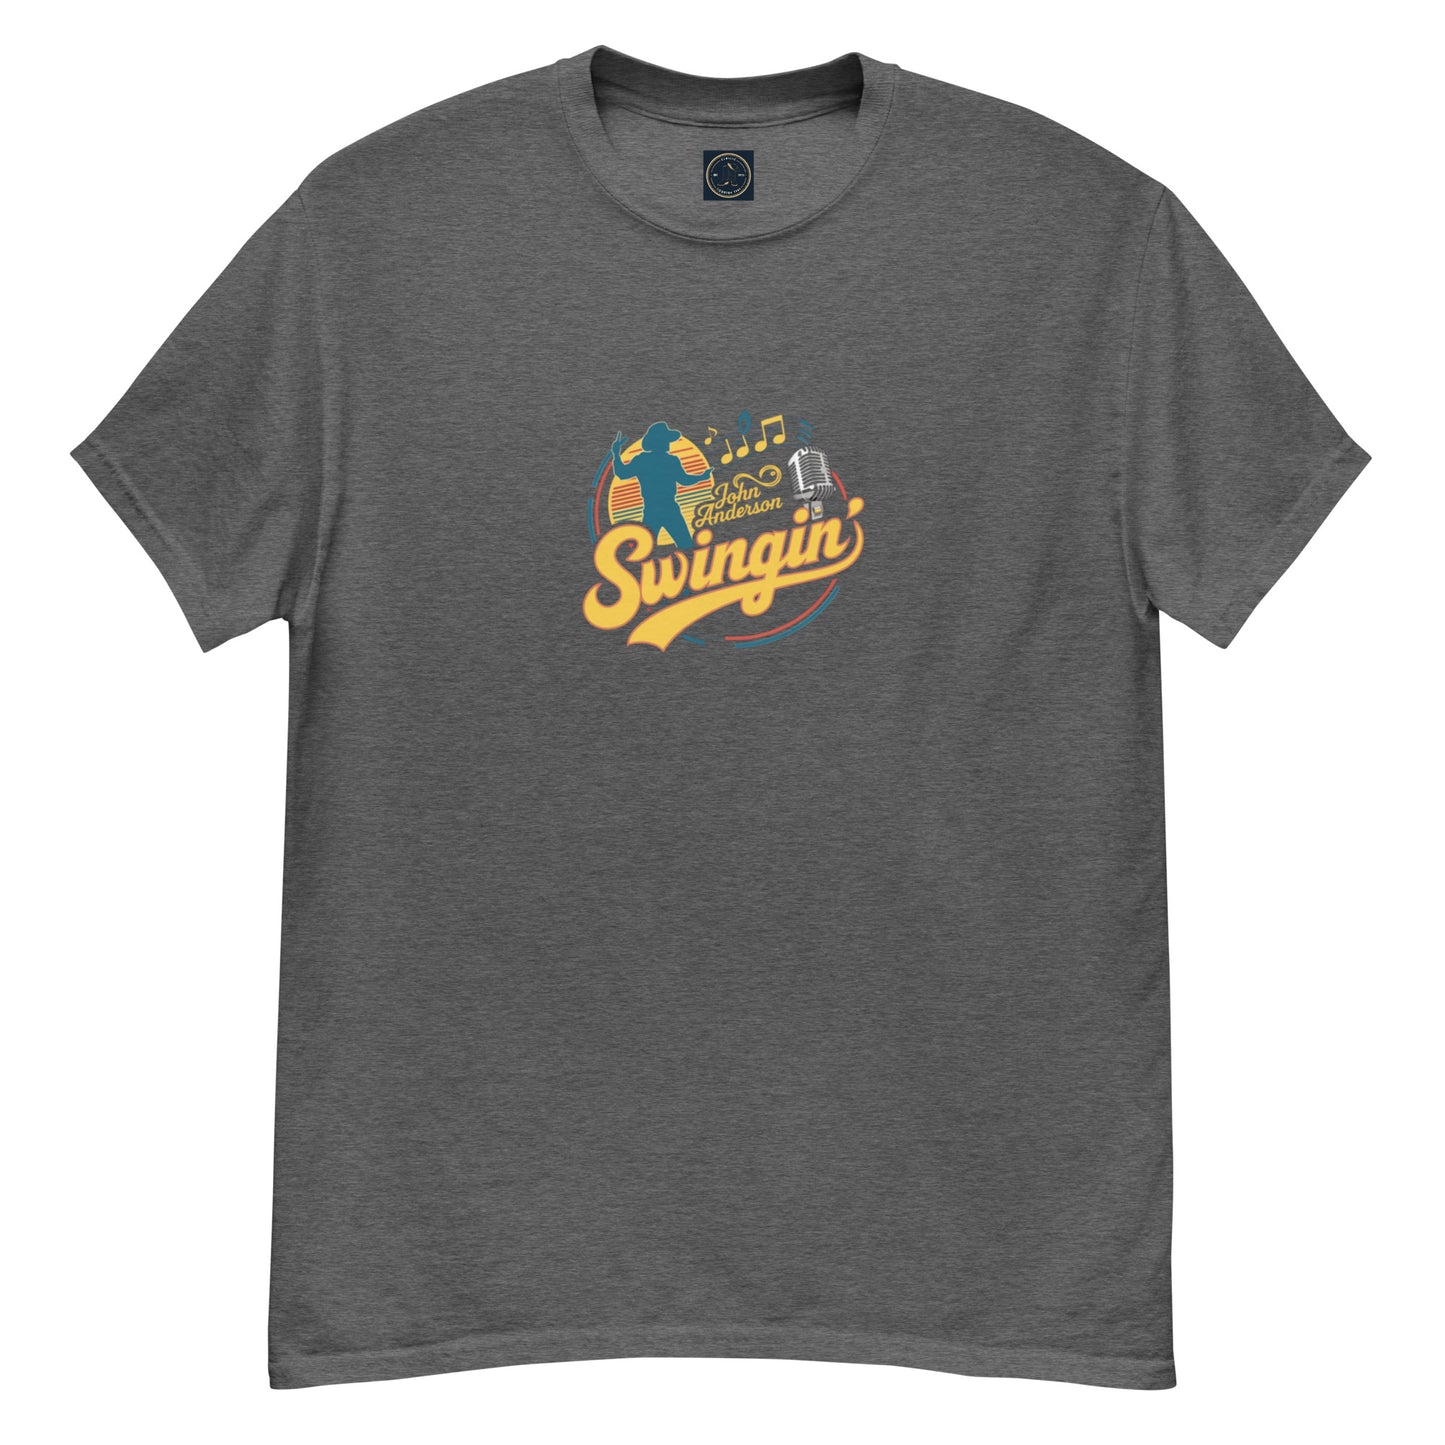 Swingin' - Inspired by John Anderson | Classic Country Tees